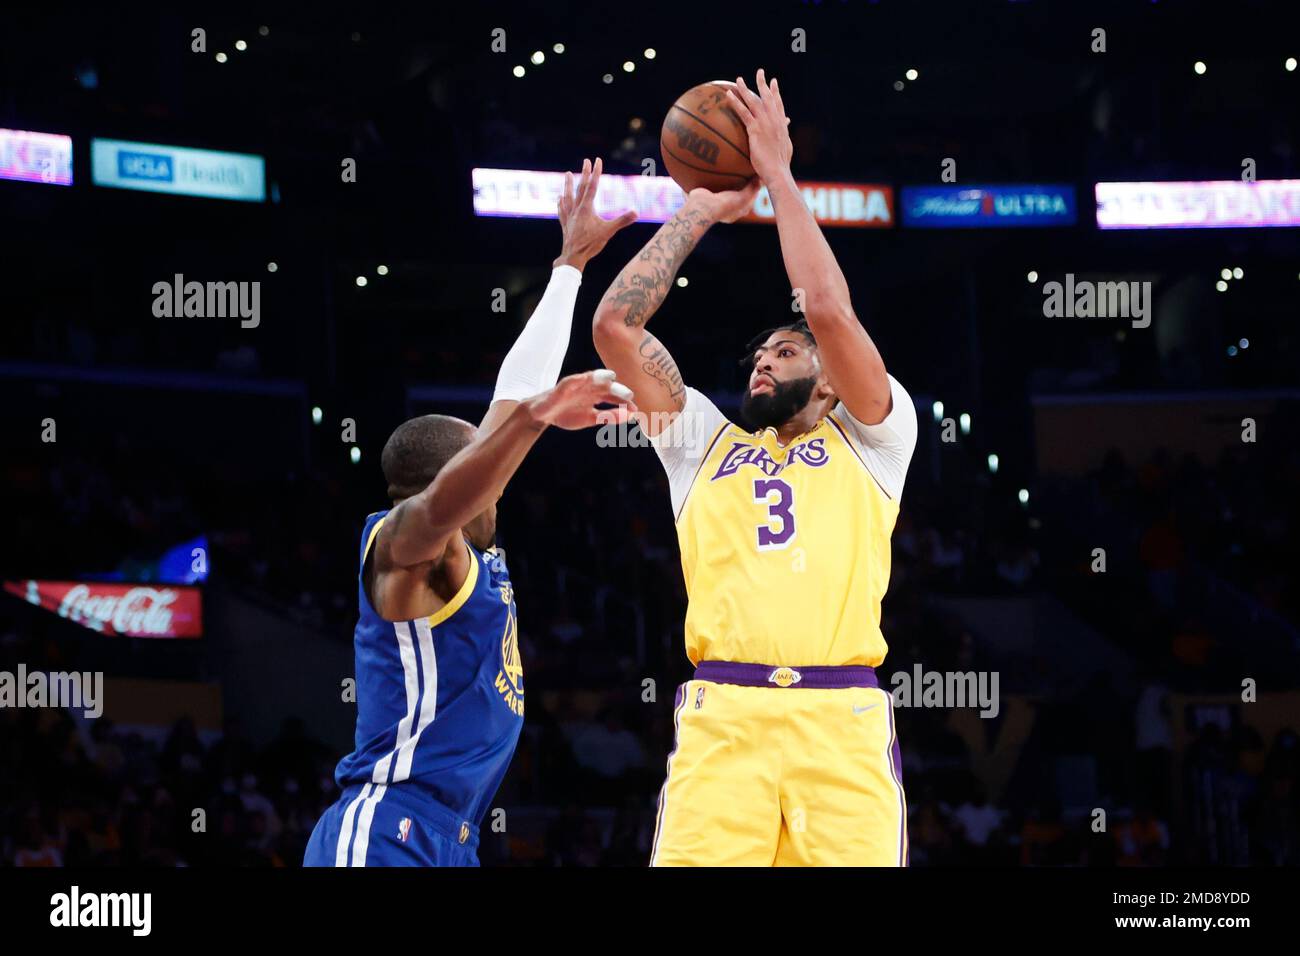 Los Angeles Lakers forward Anthony Davis (3) shoots against Golden State Warriors forward Andre Iguodala (9) during the first half of an NBA basketball game in Los Angeles, Tuesday, Oct. 19, 2021. (AP Photo/Ringo H.W. Chiu) Stock Photo